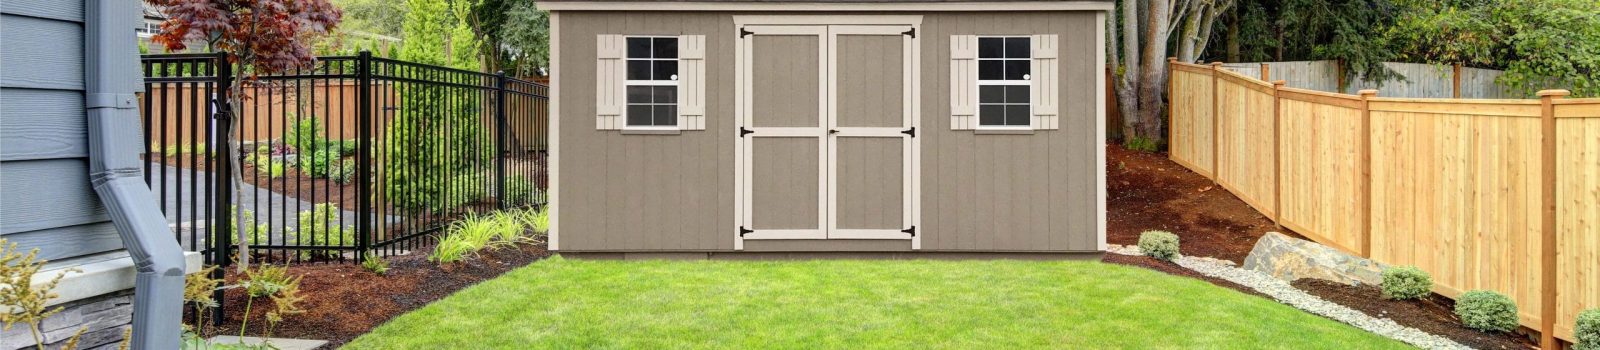 Storage Sheds in Augusta GA | Buy Directly from the    Builder